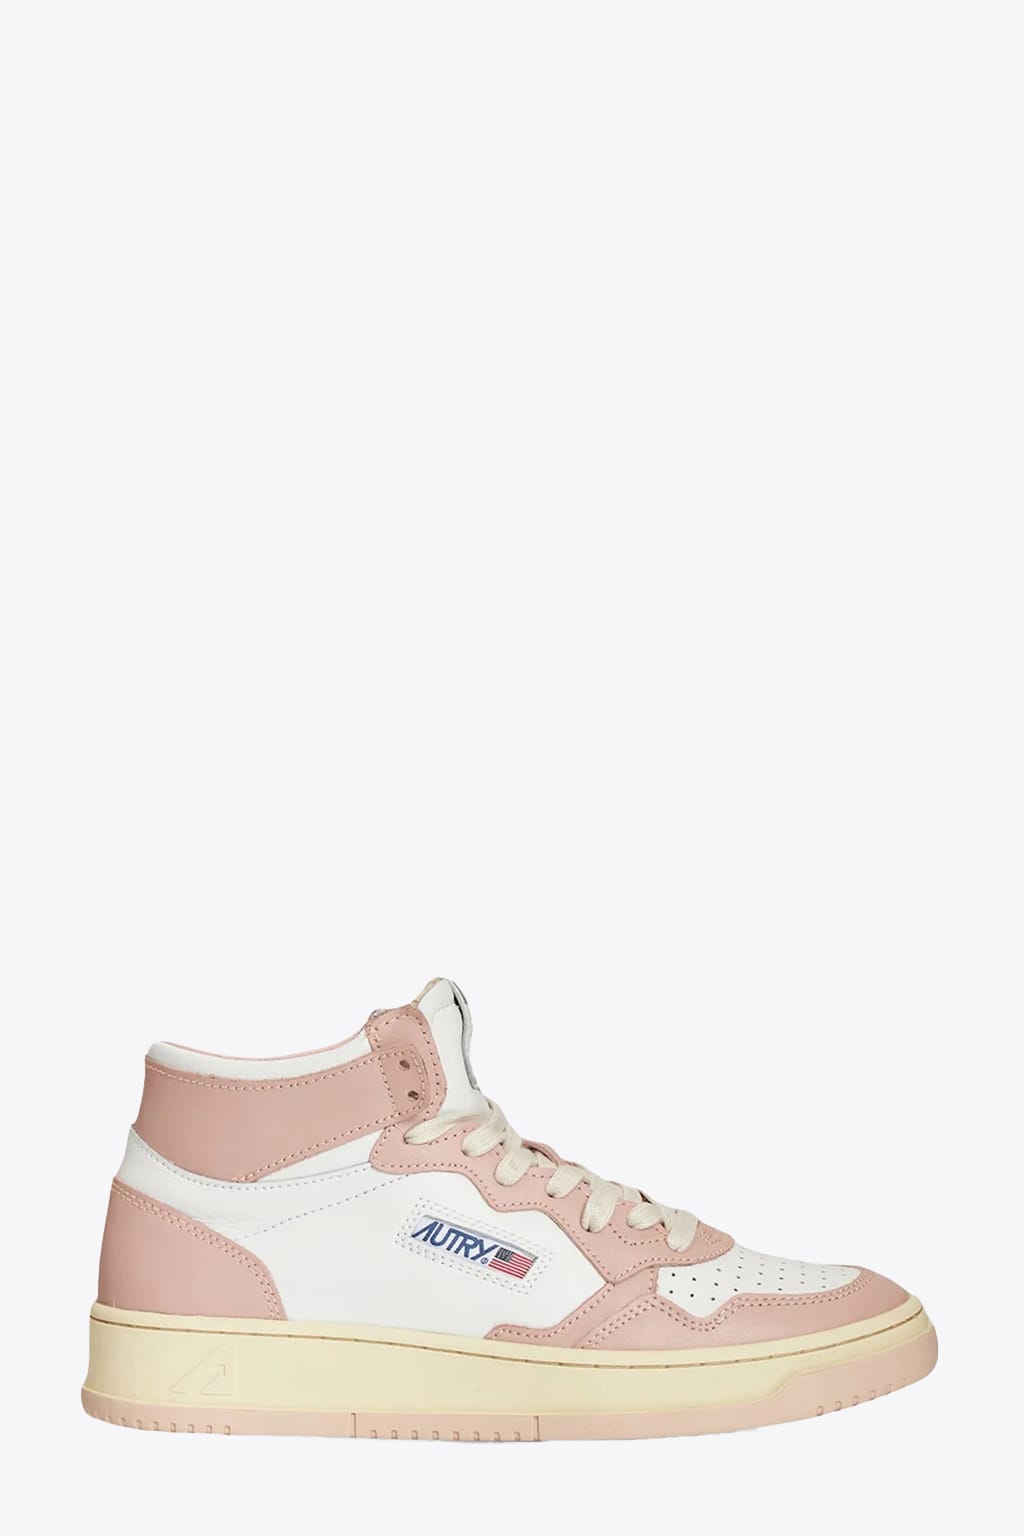 Autry 01 Mid Wom Leat/leat White/pink hi top lace up sneakers - Medalist